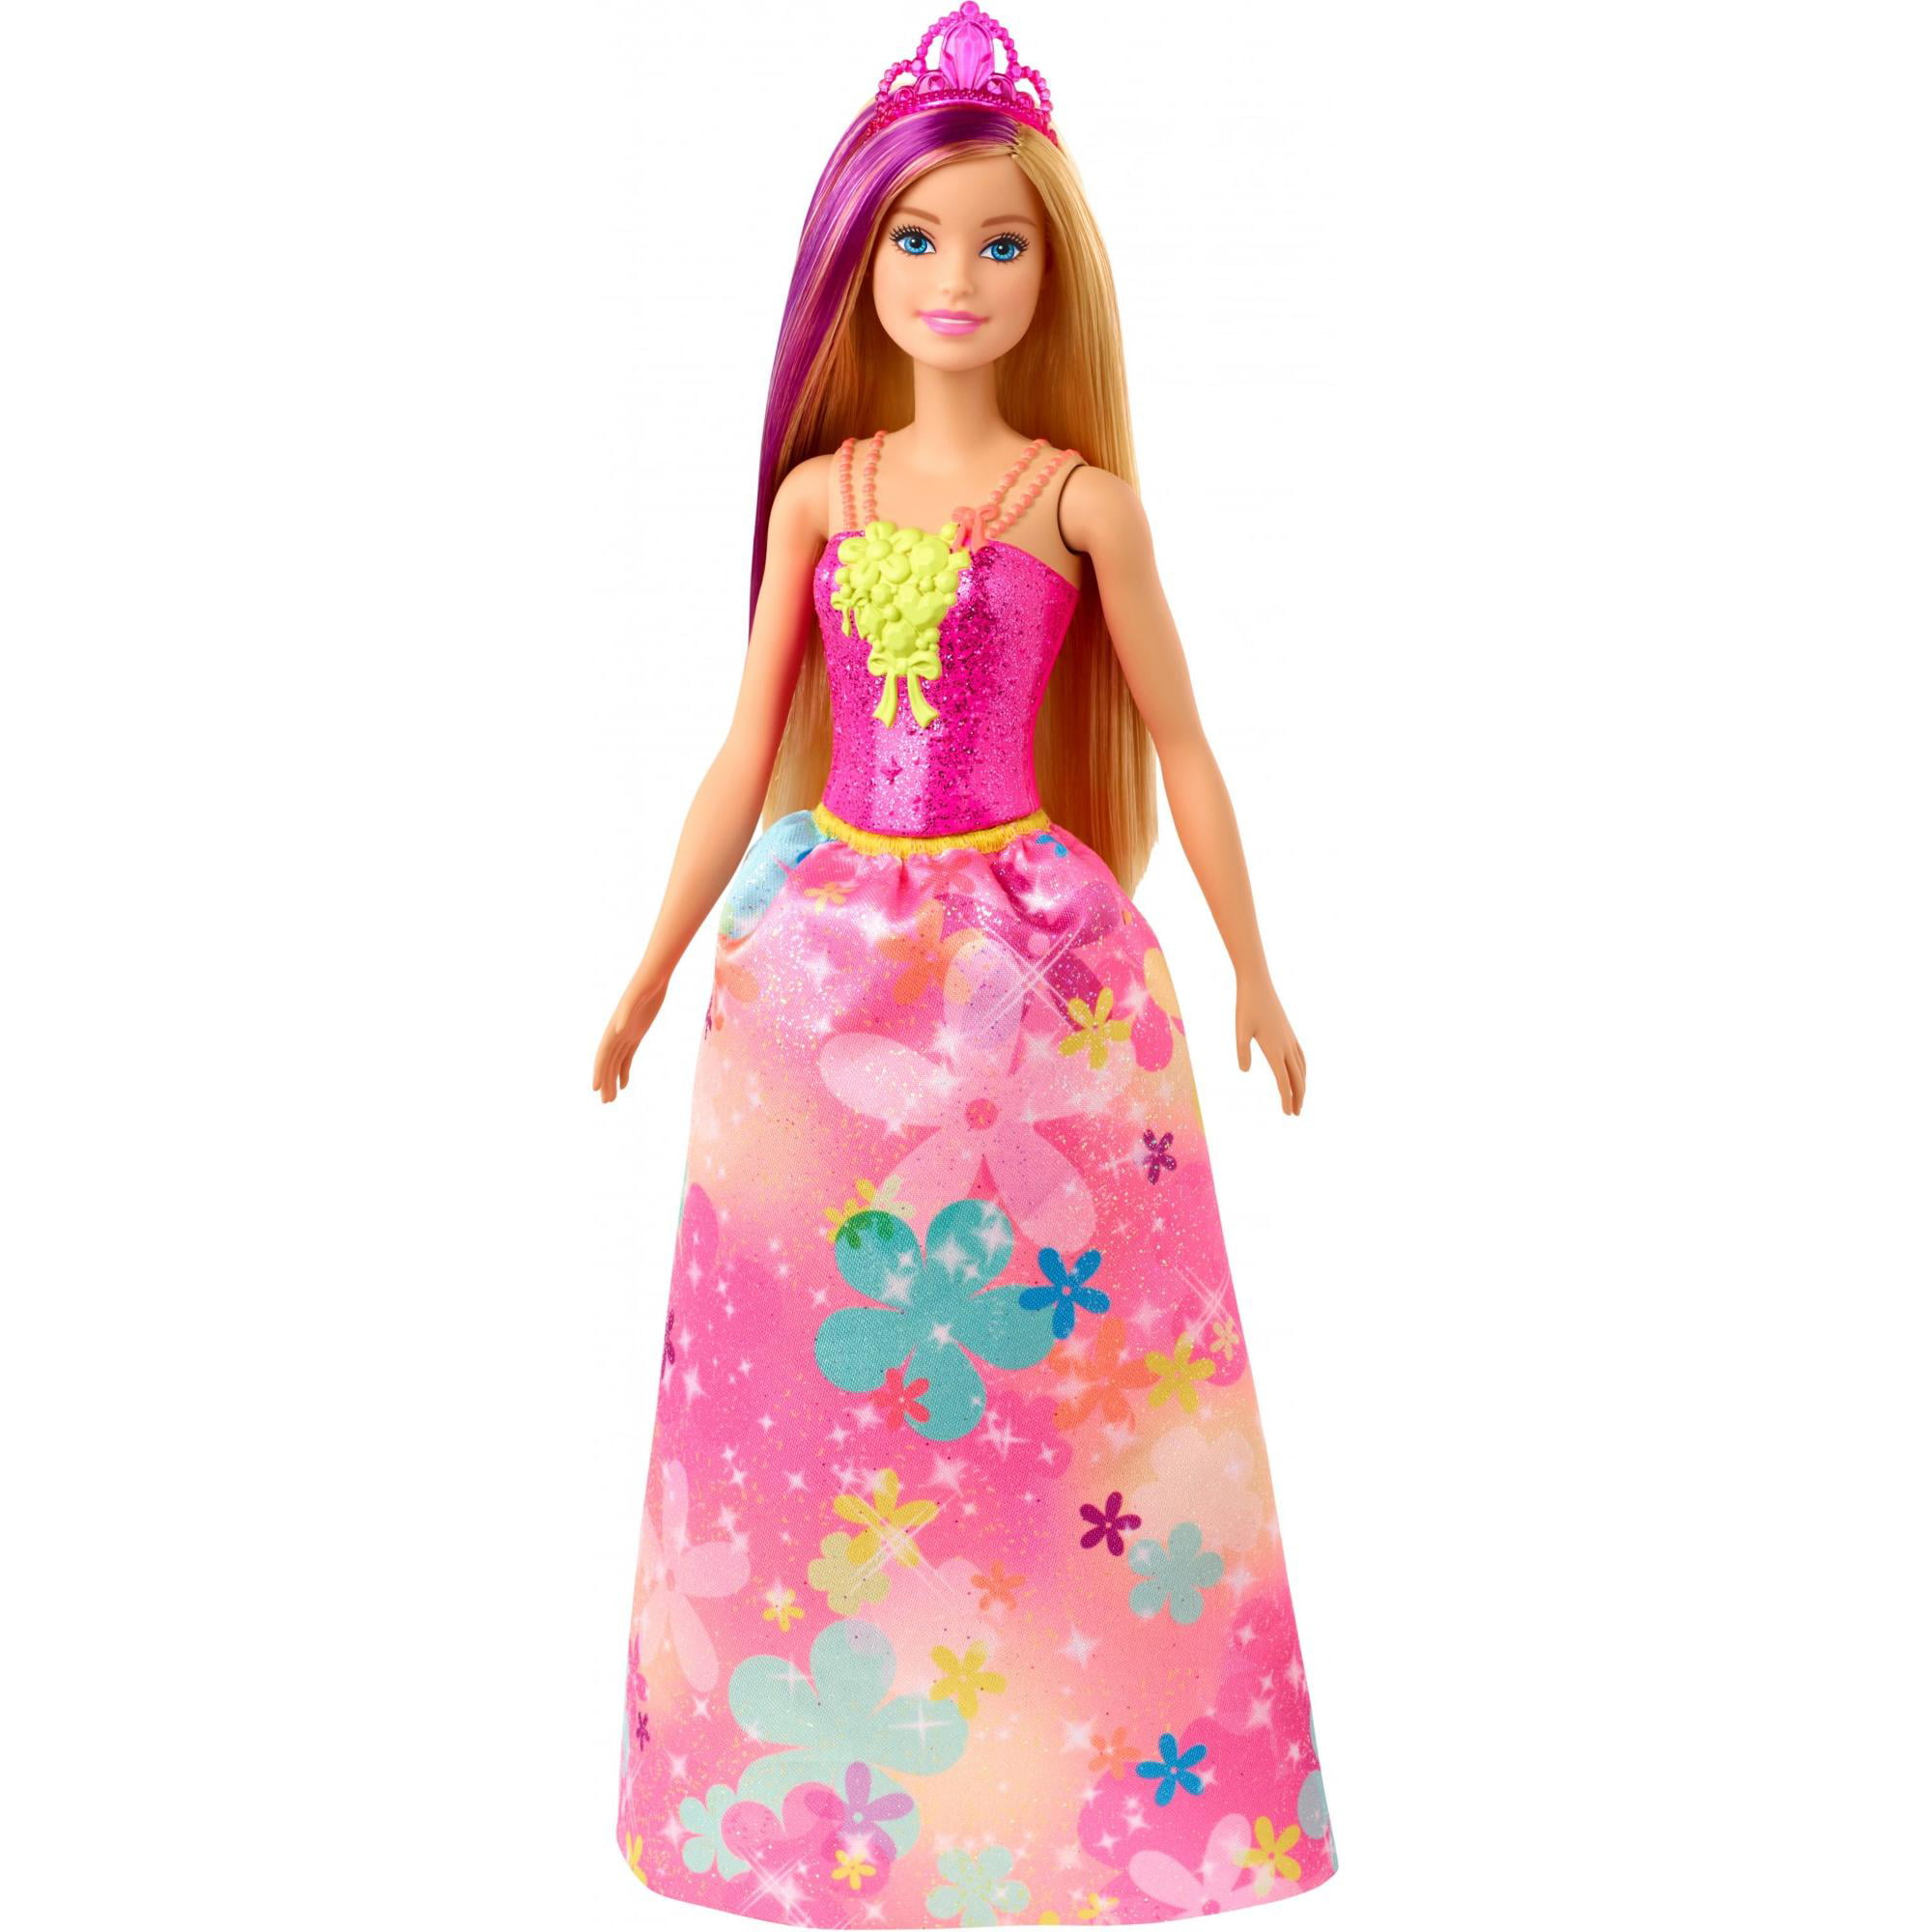 Purple Knee Length Dress Covered in Roses For Barbie Doll 